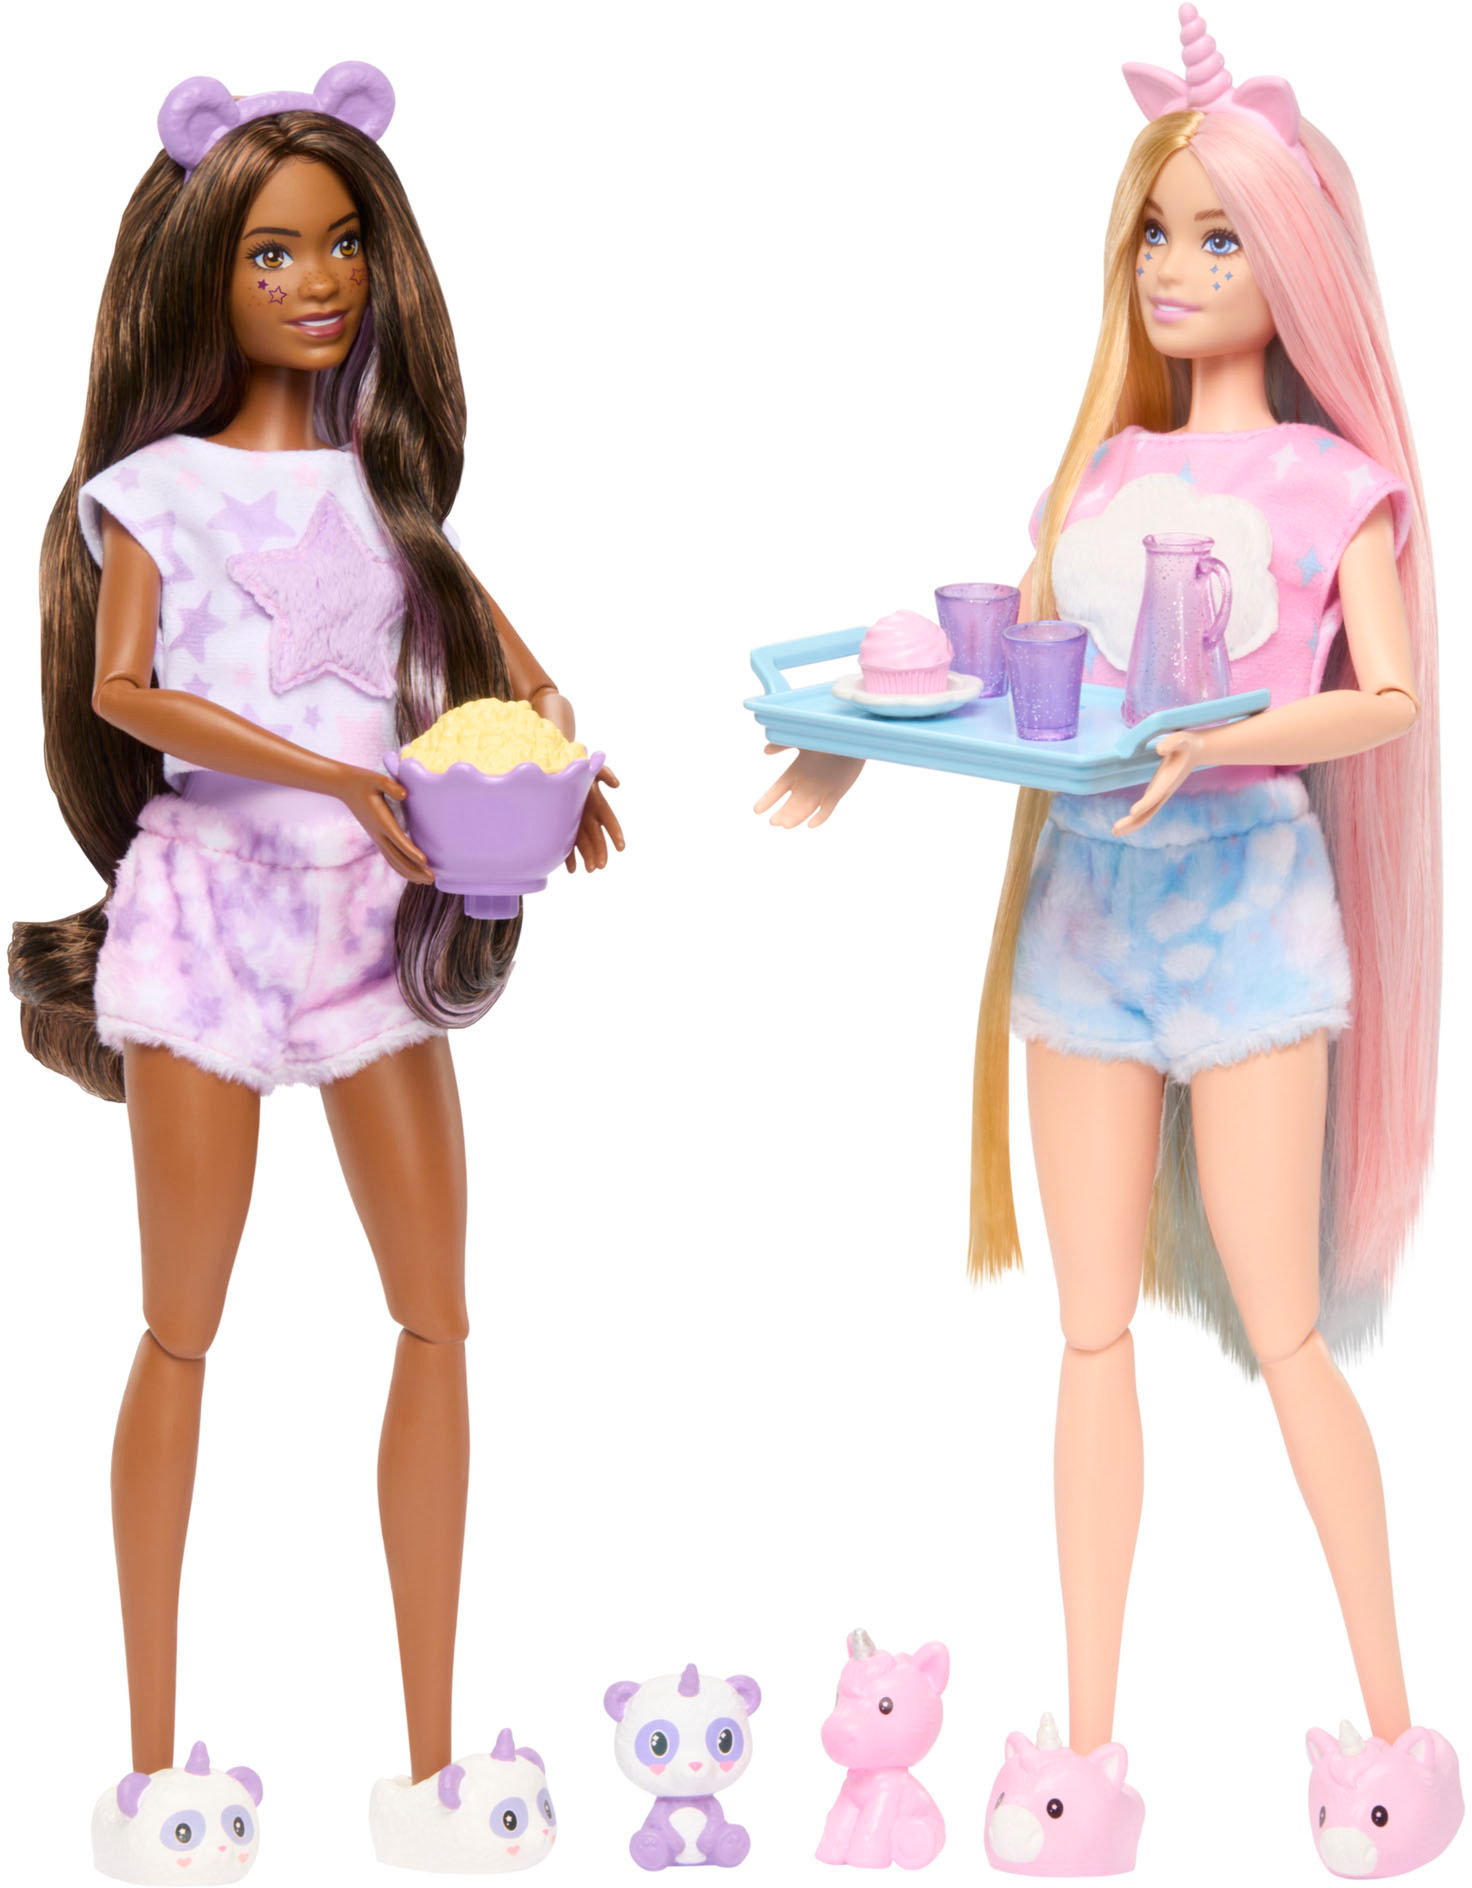 Barbie Doll Color Reveal Gift Set, Tie-Dye Fashion Maker with 2 Barbie  Dolls 